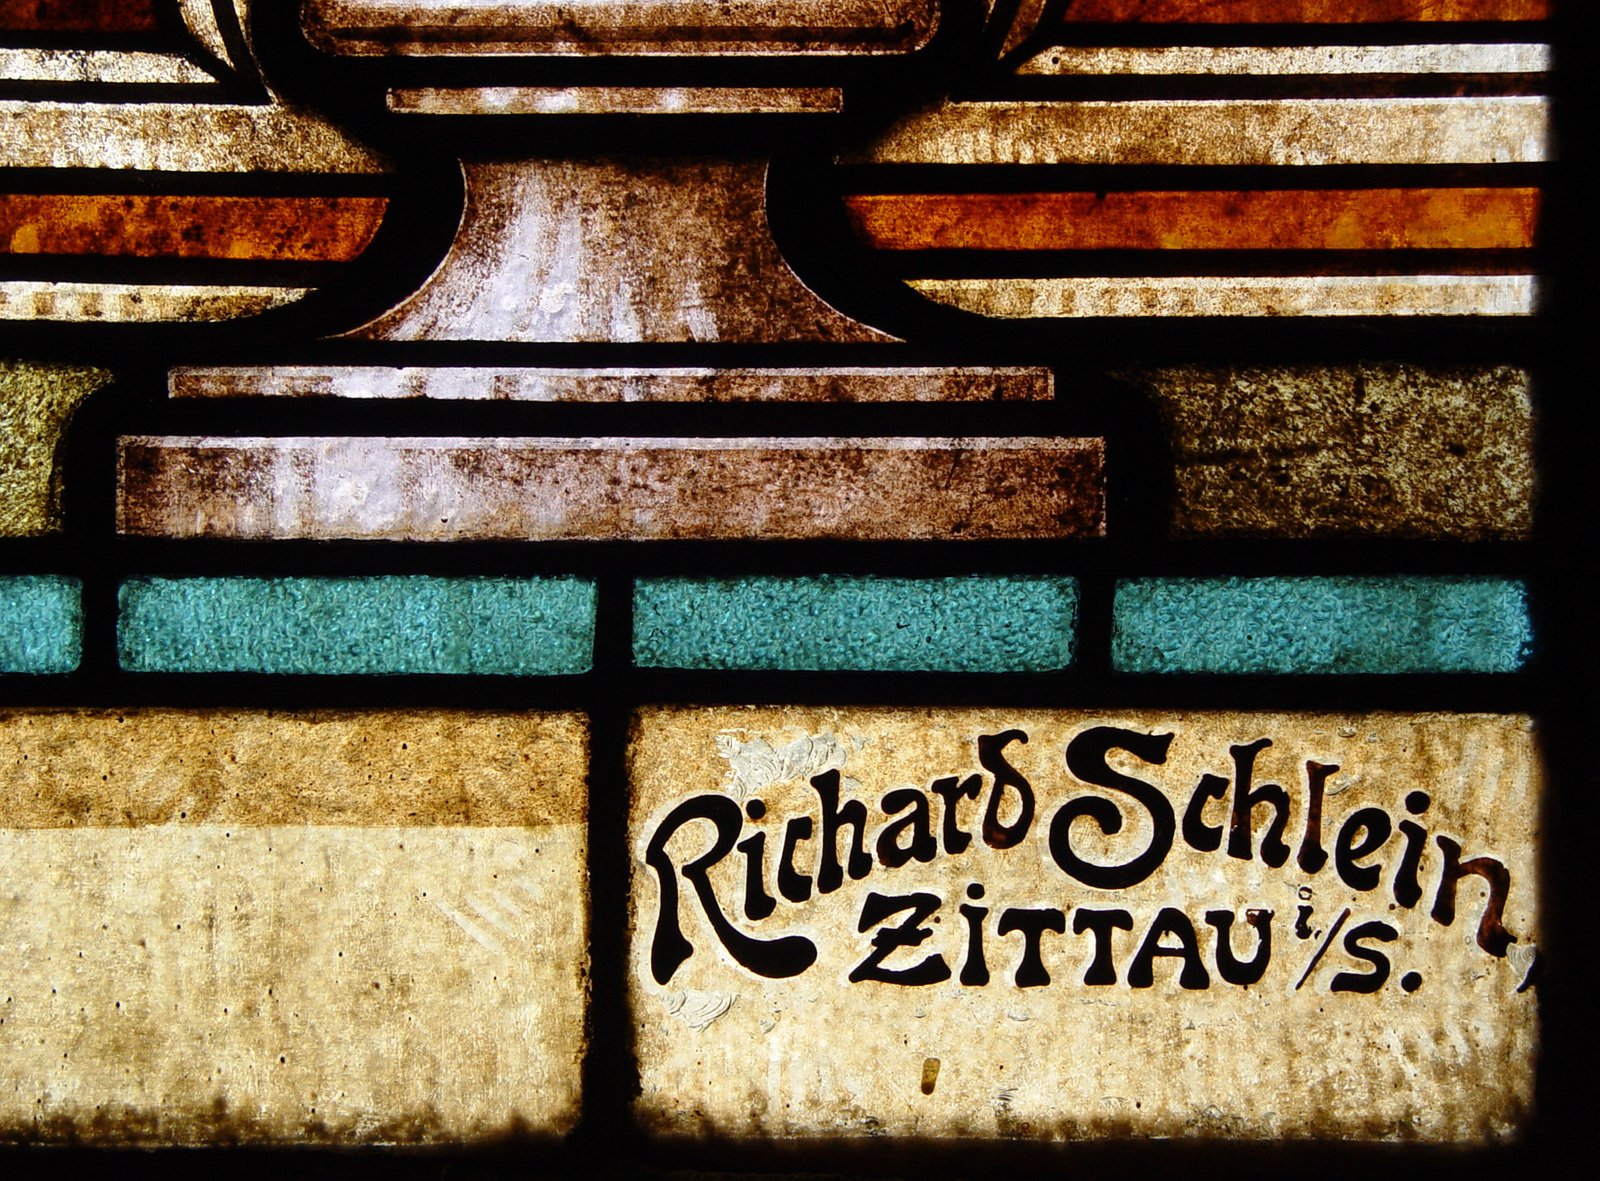 a glass showing the image of a cup in a stained glass window